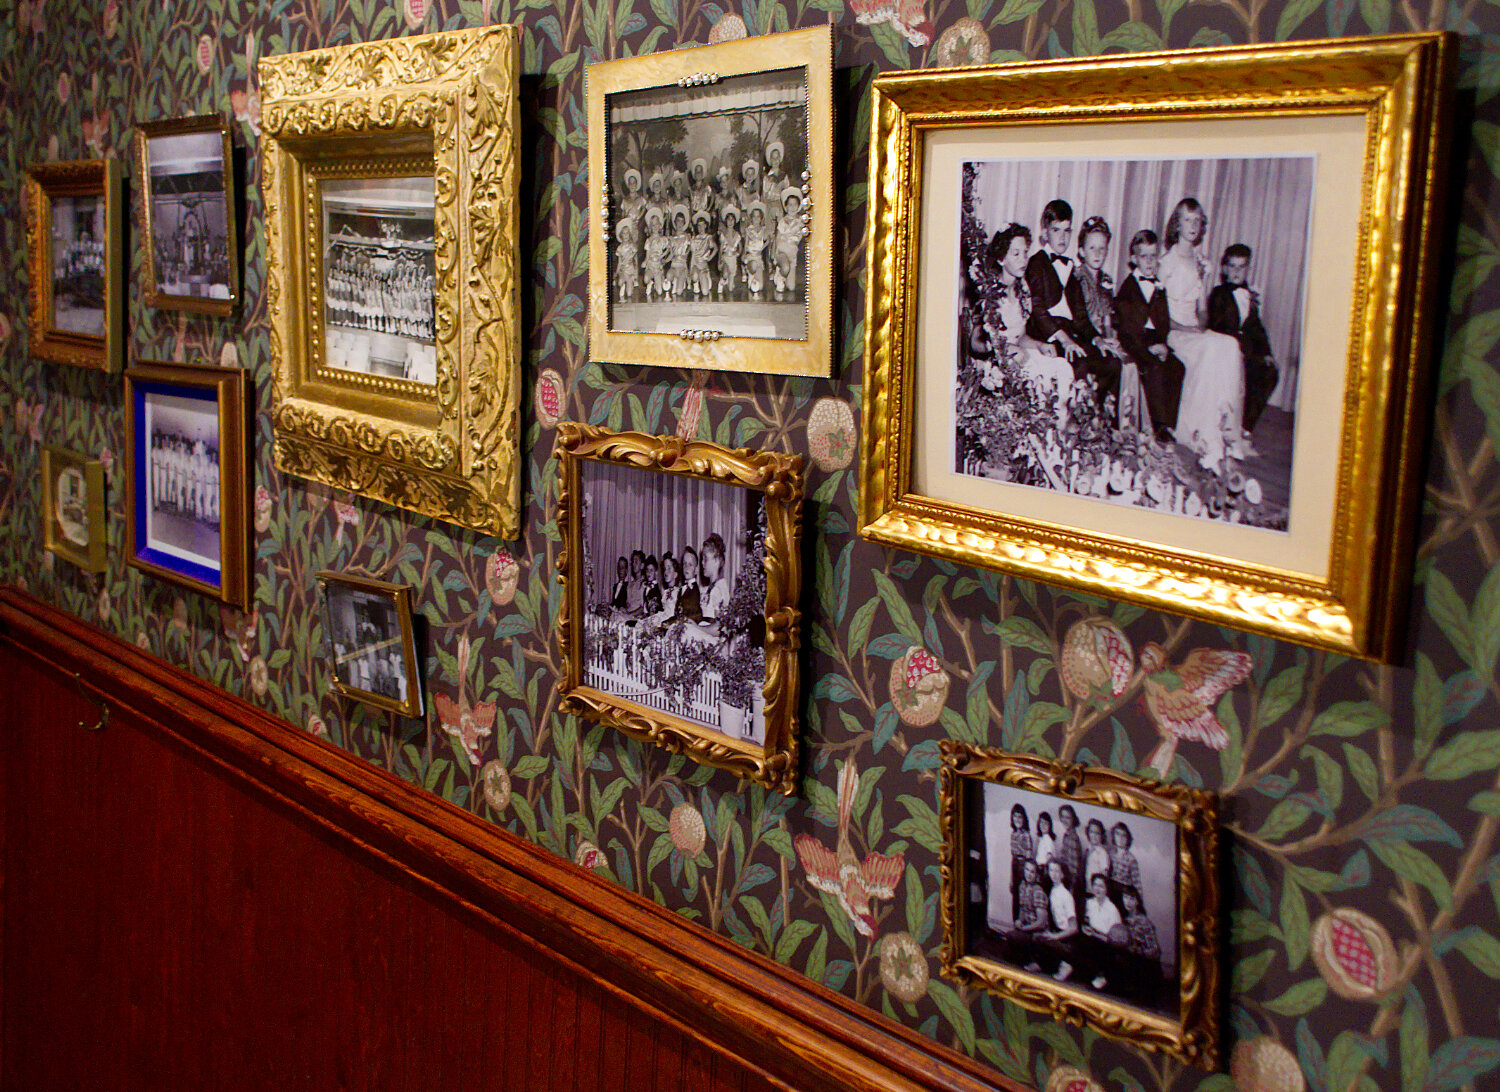 Historical photos from the old Coke (Lloyd) schoolhouse are on display in the refurbished school building.